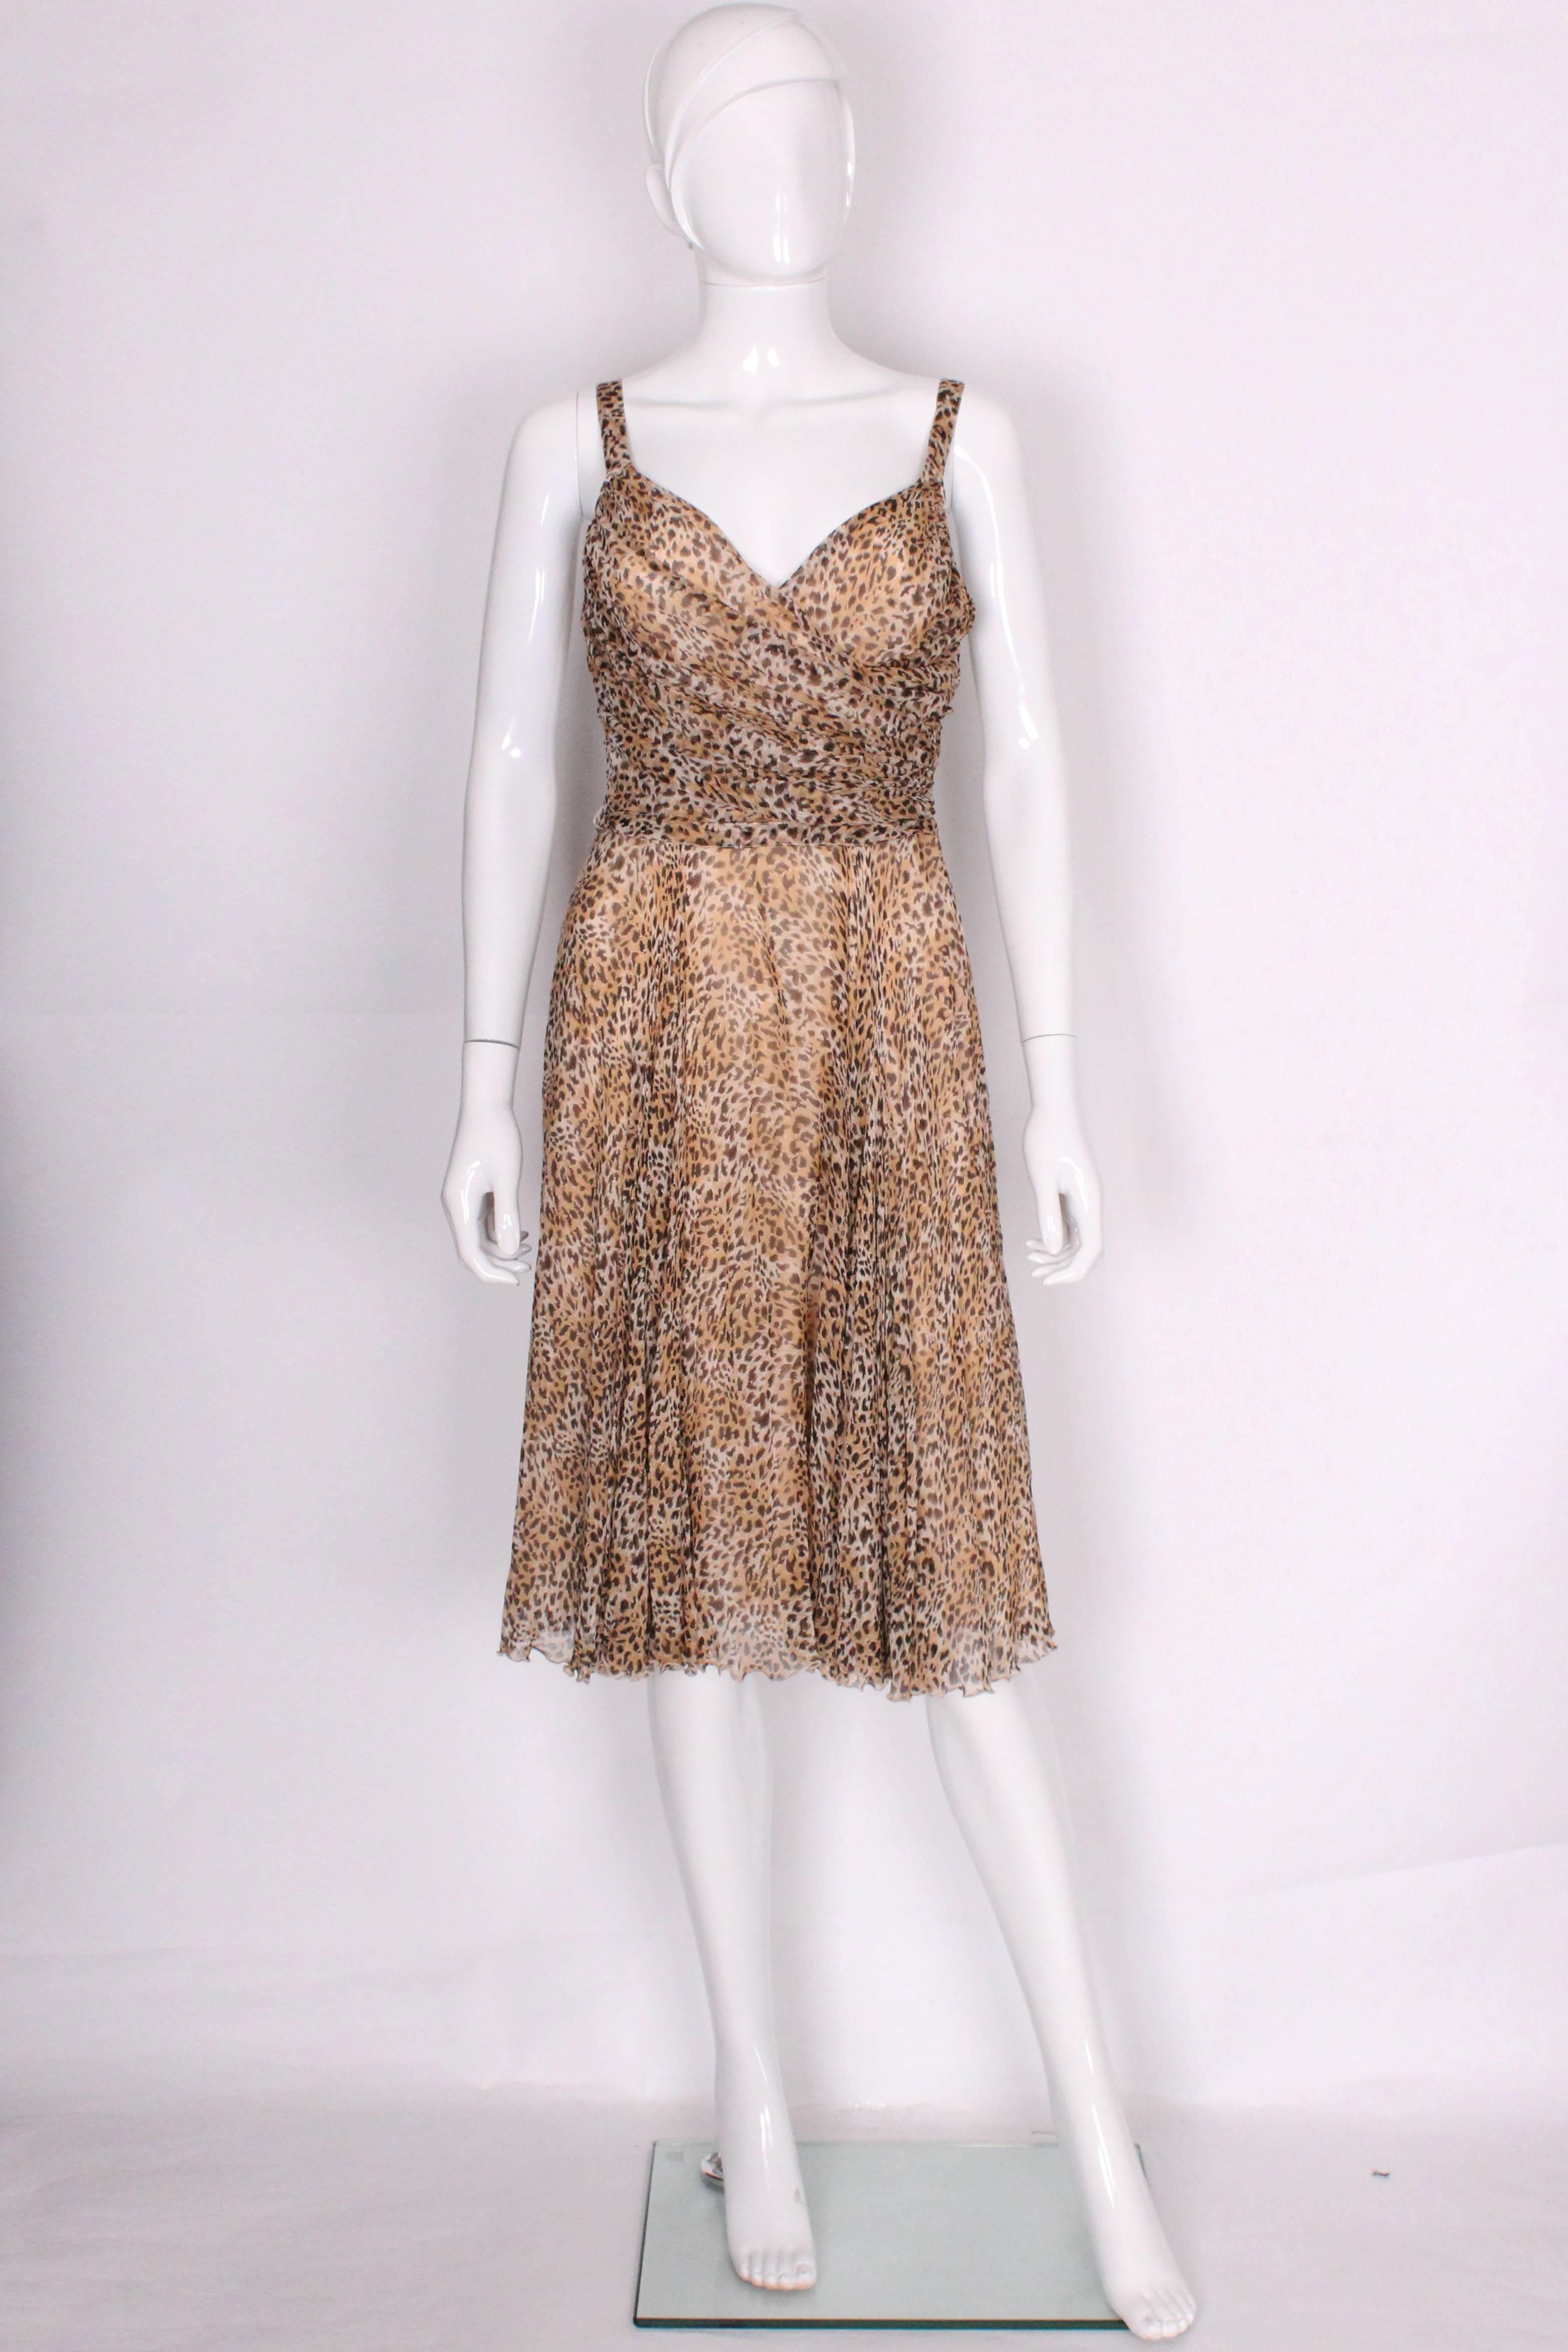 A great party dress by Italian firm La Perla. The dress is in a tasteful animal print silk, with cotton lining. It has a wrap over v neckline at the front with gathering at the back. The dress has a belt in the same fabric and the shoulder straps